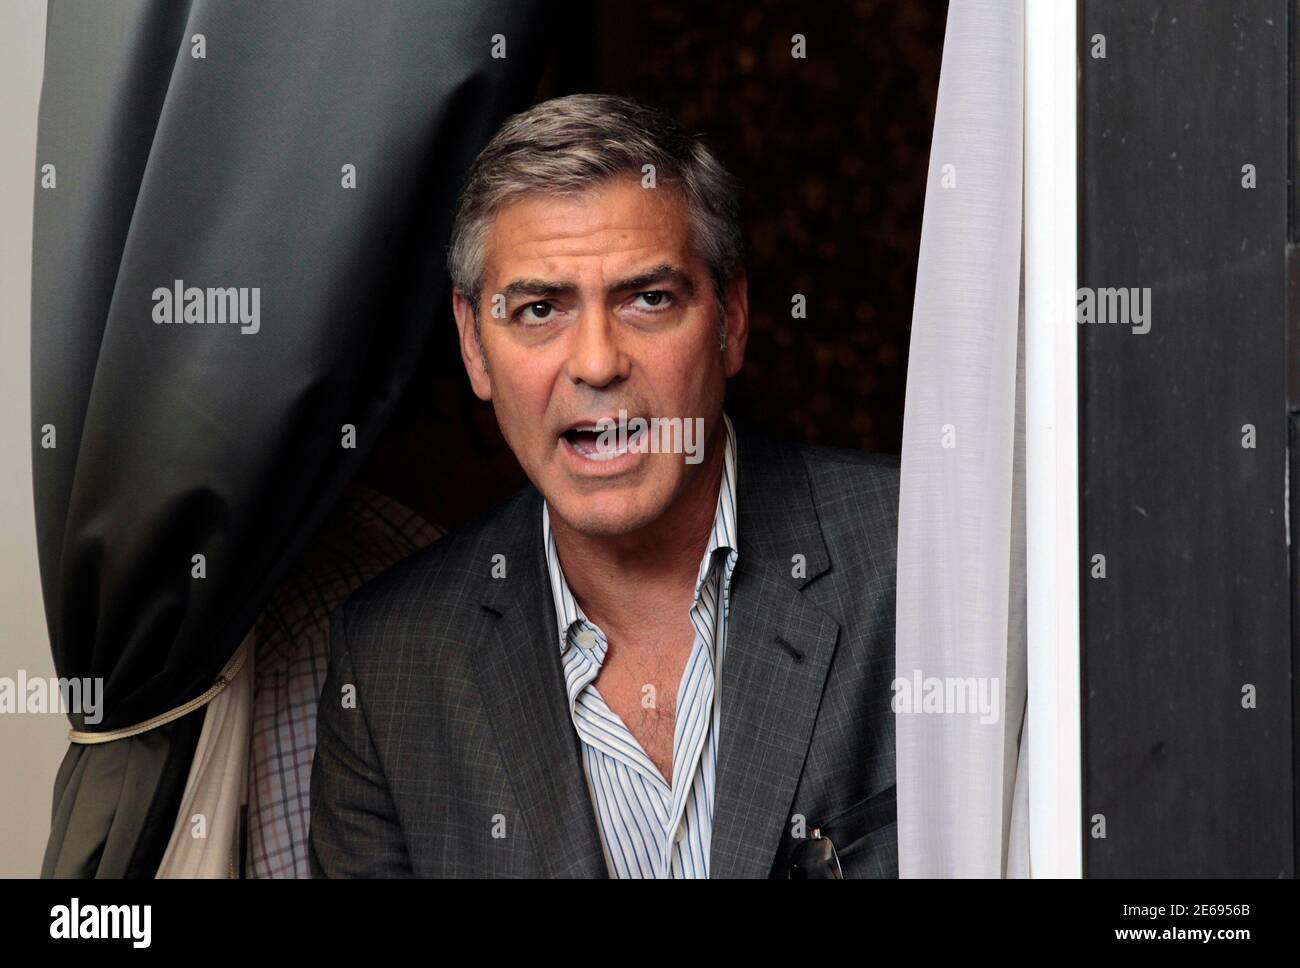 George Clooney reacts as he arrives for a photocall of his film 'The Ides of March' at the 68th Venice Film Festival in Venice August 31, 2011. REUTERS/Alessandro Bianchi  (ITALY - Tags: ENTERTAINMENT) Stock Photo